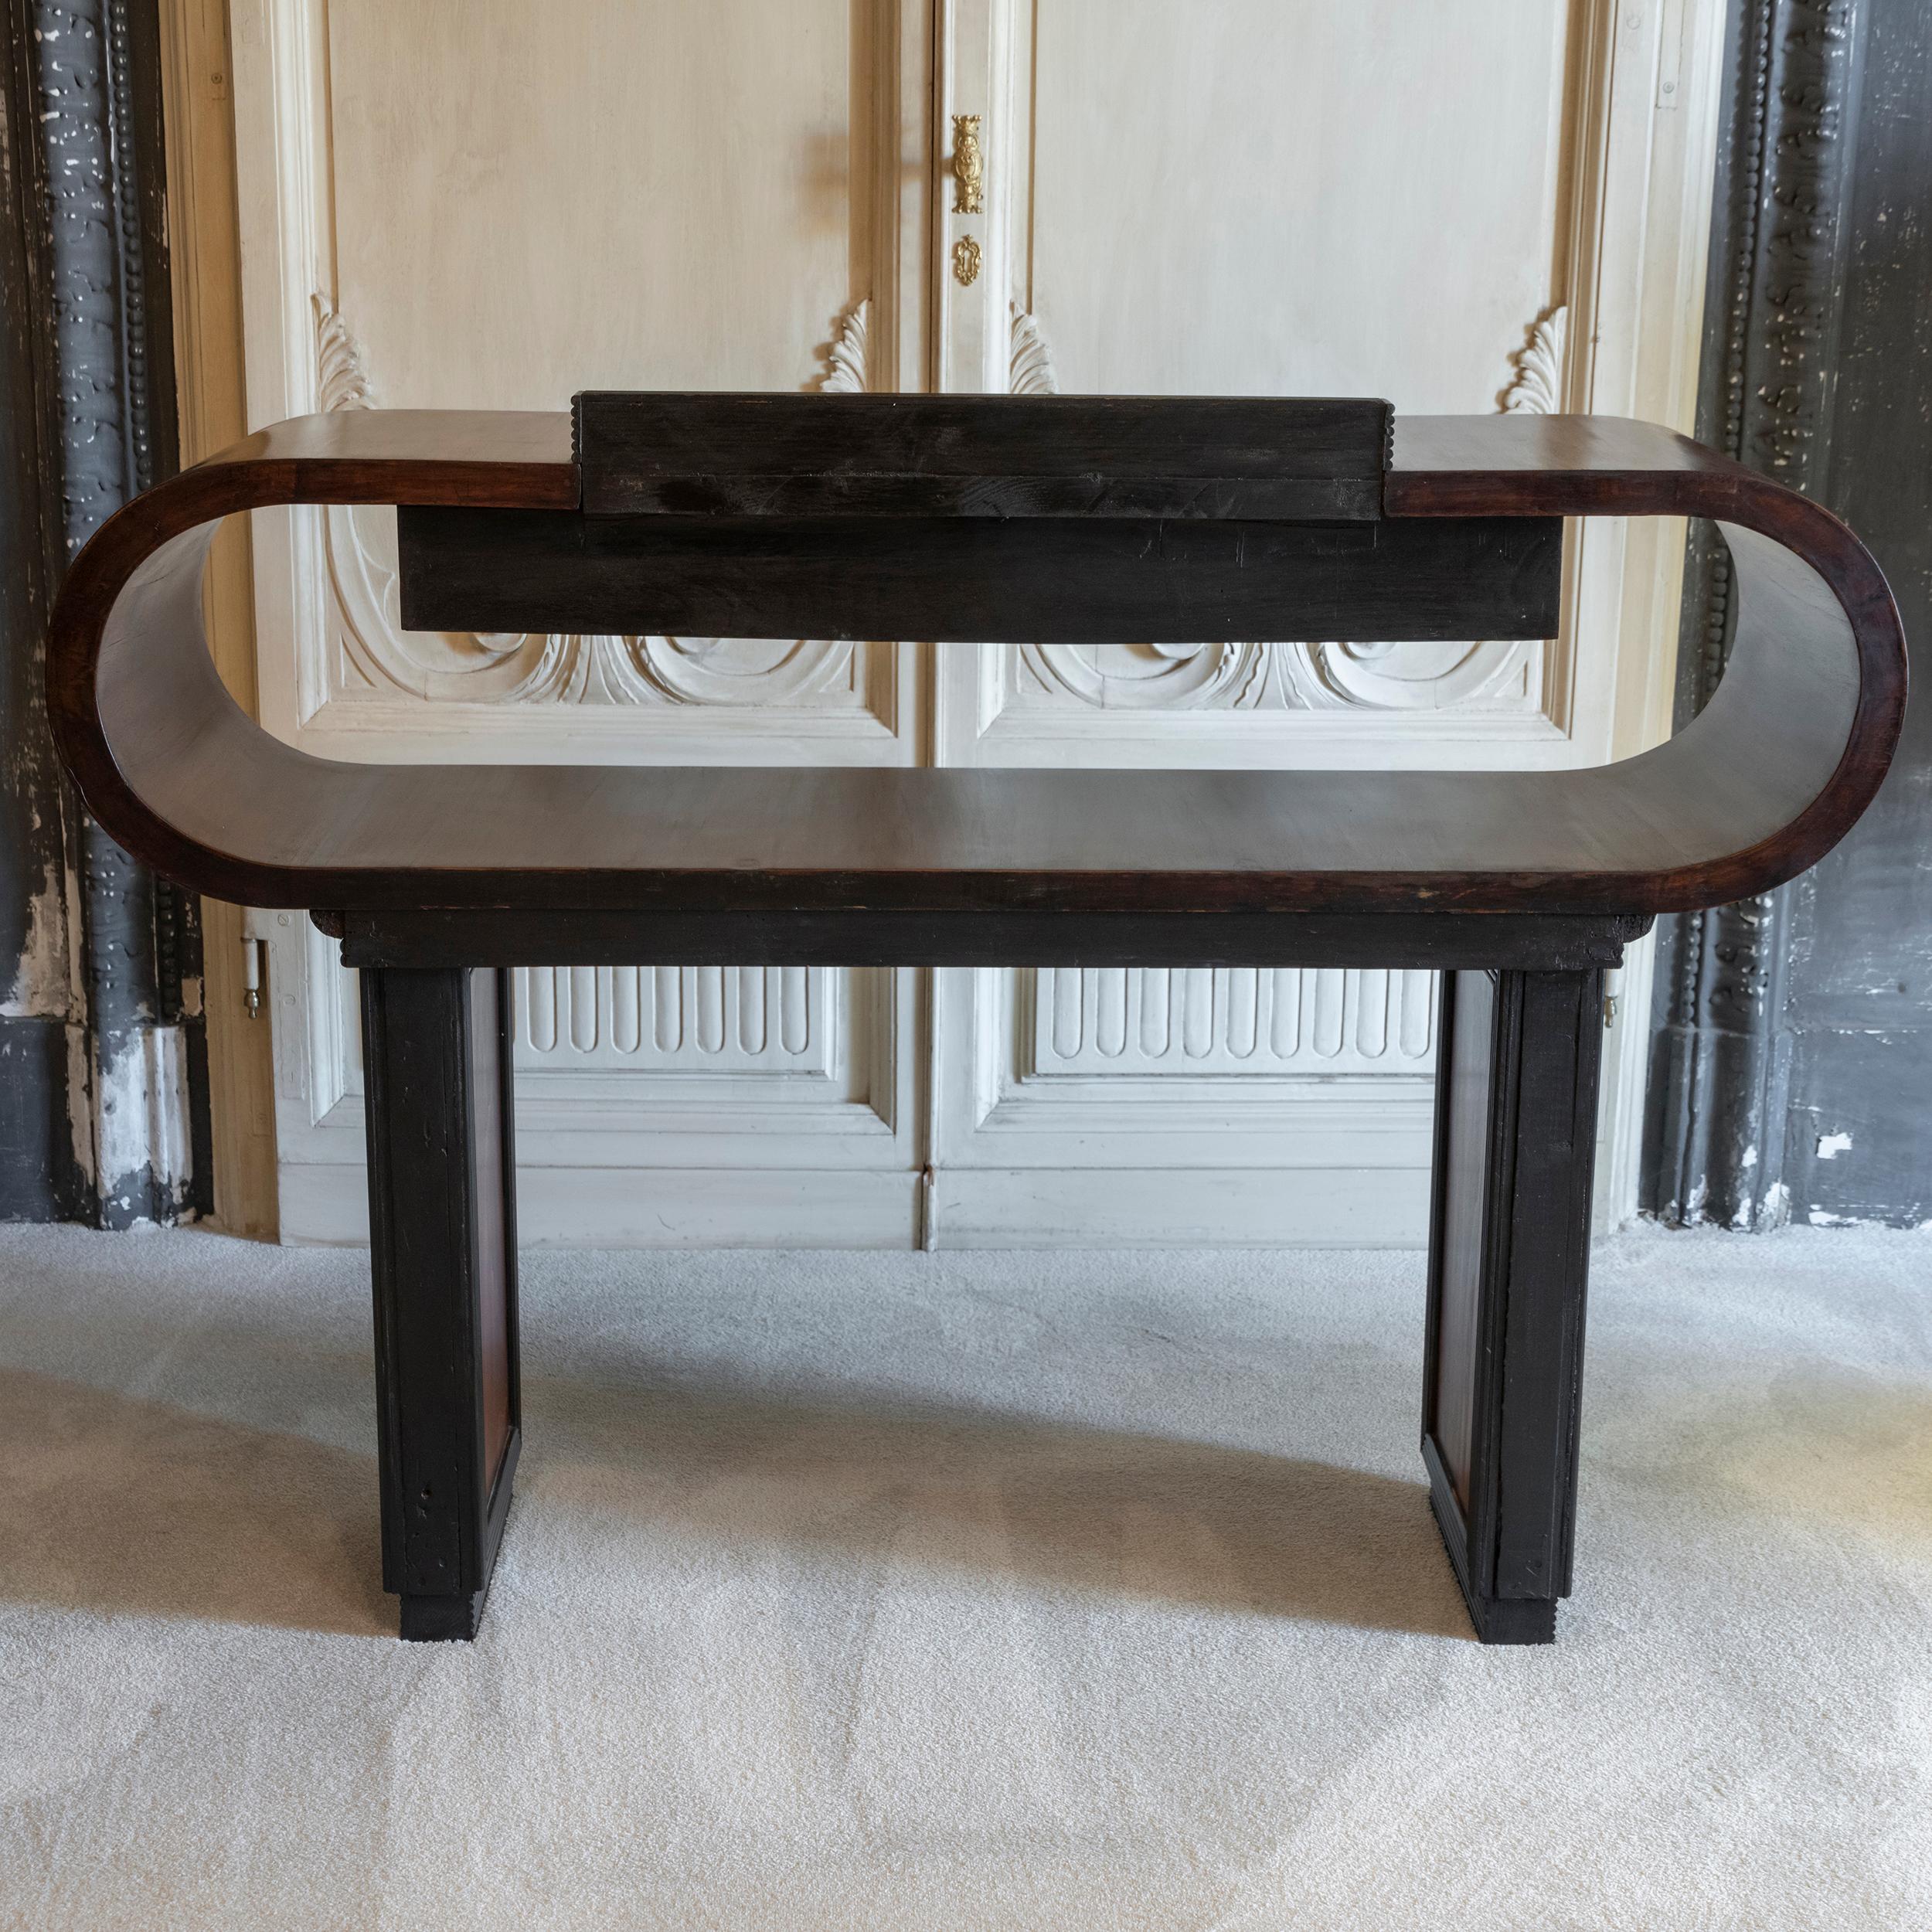 1930s Italian Deco Console Table with Drawers Palisander, Mahogany and Walnut For Sale 1